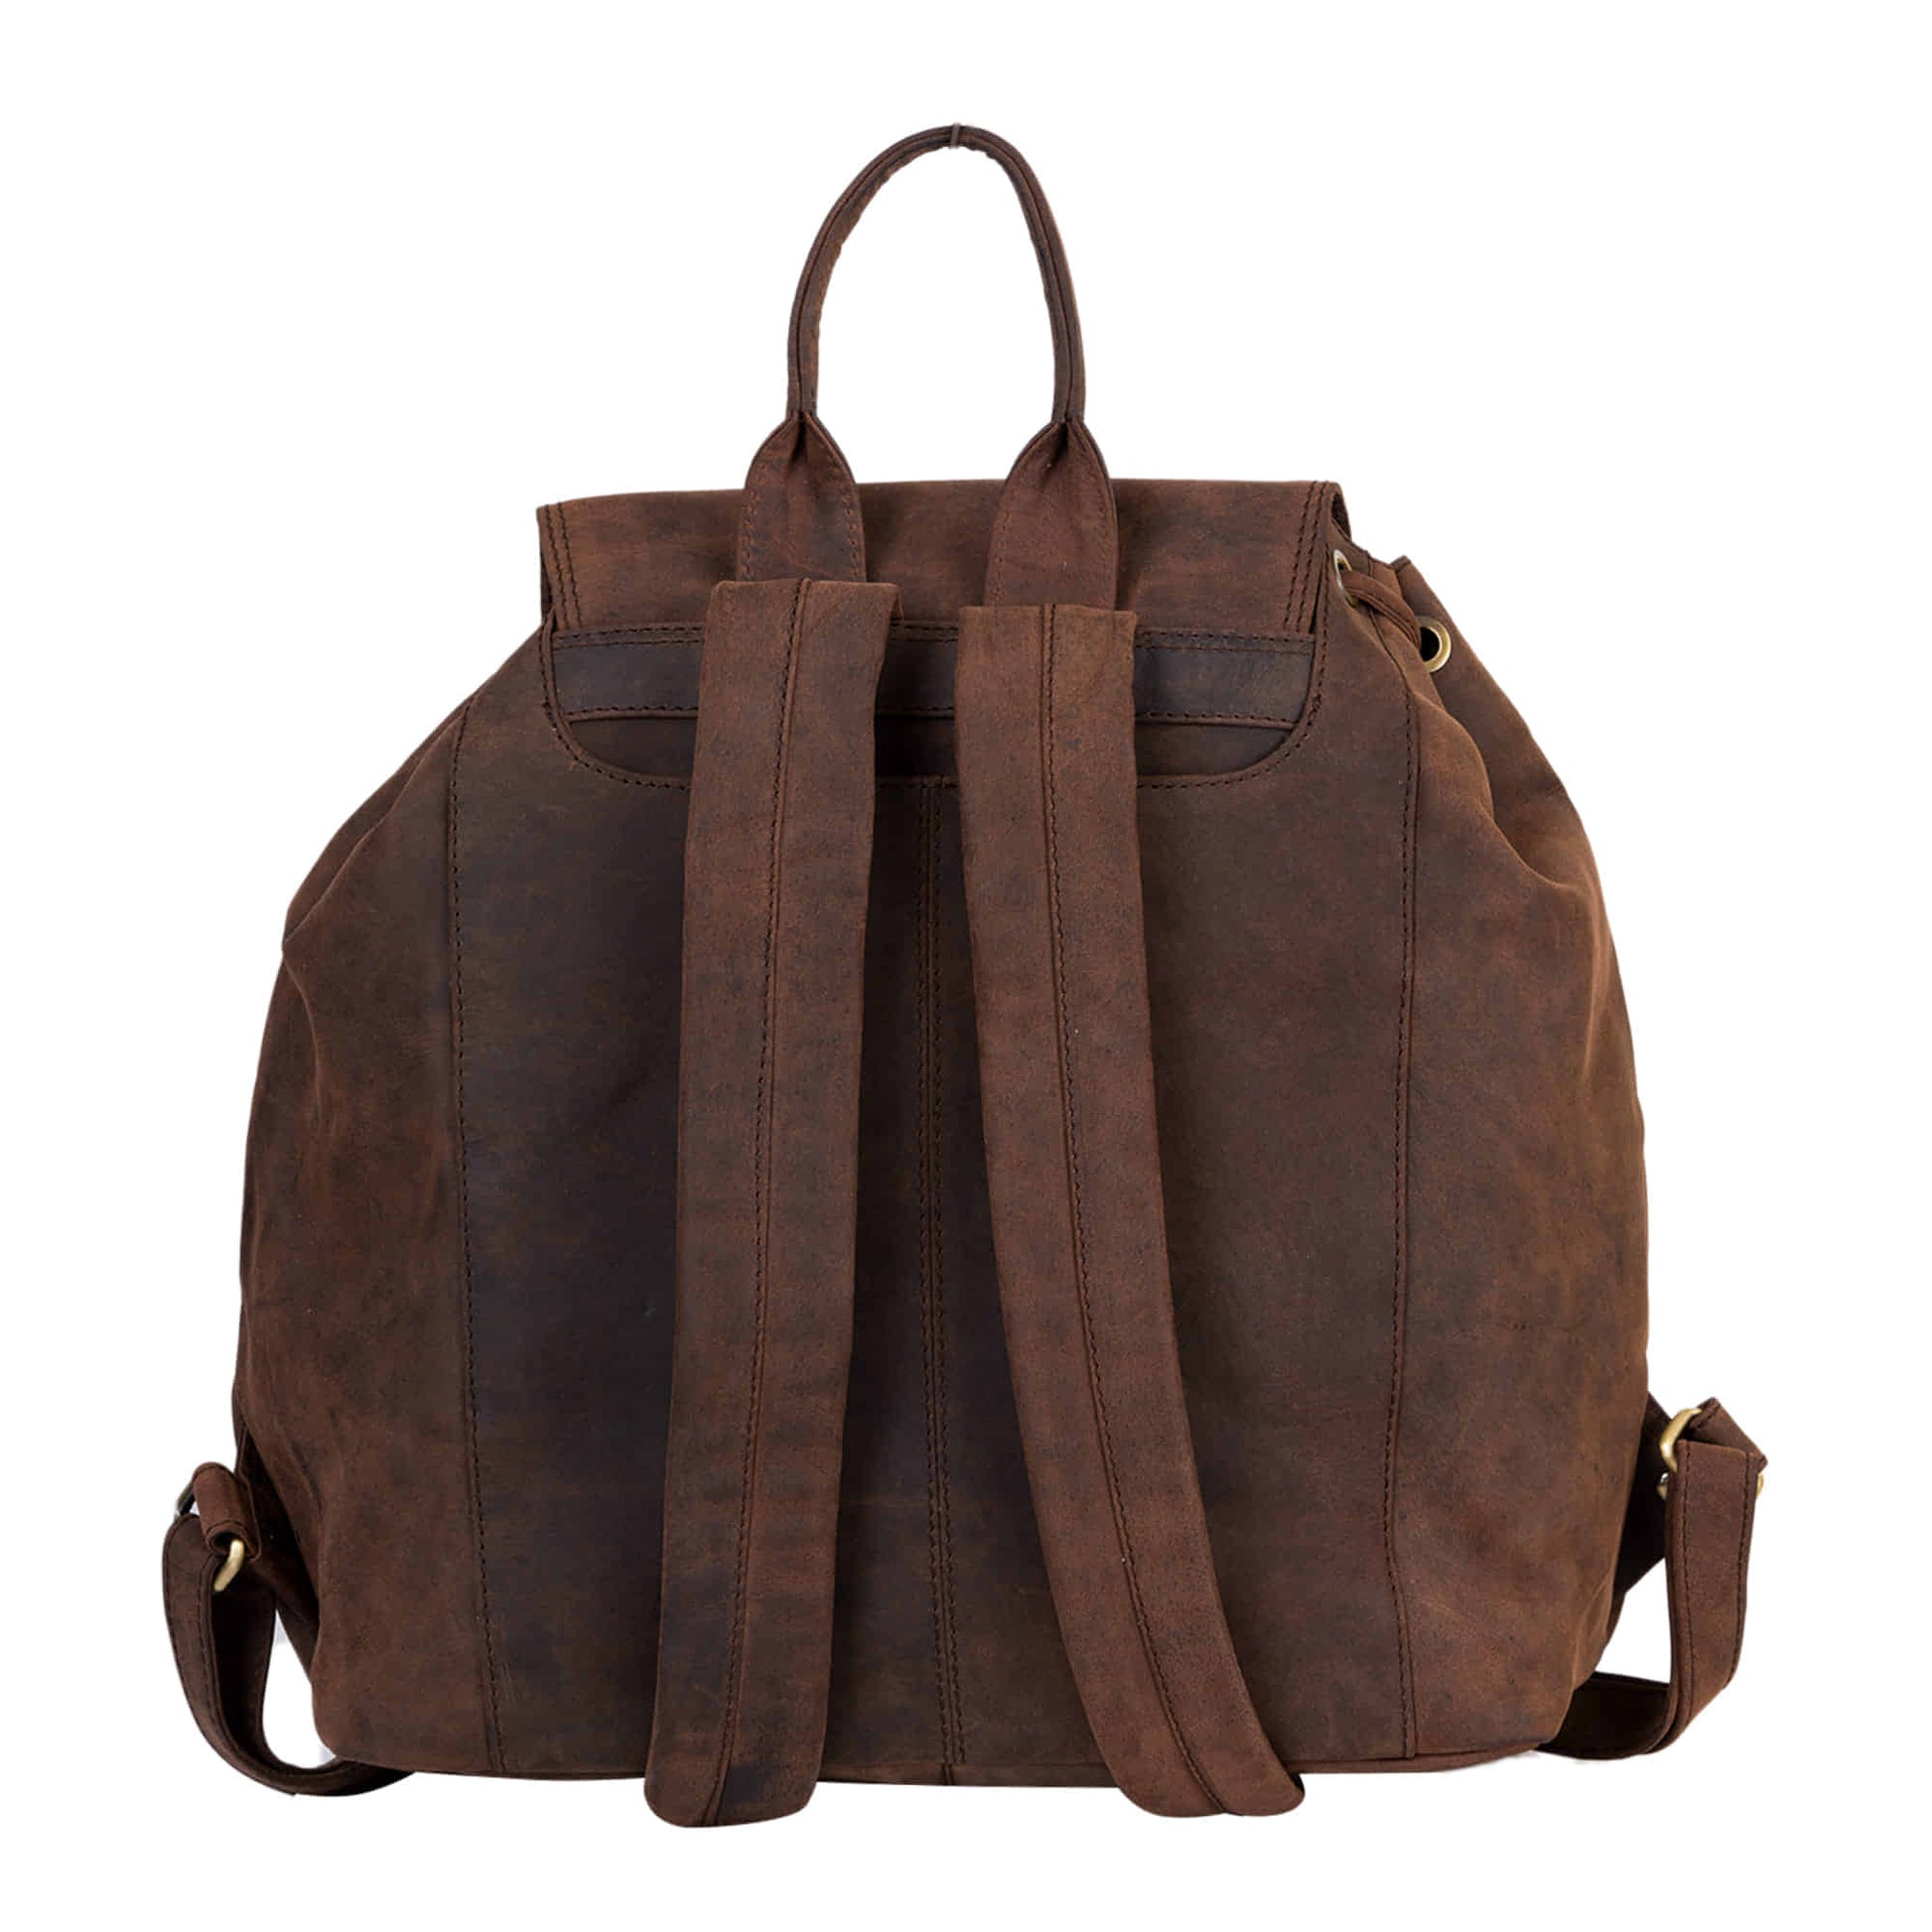 Style n Craft 392650 Backpack in Full Grain Dark Brown Hunter Leather - Back View Showing the Top Leather Handle Strap and the Padded Leather Shoulder Straps